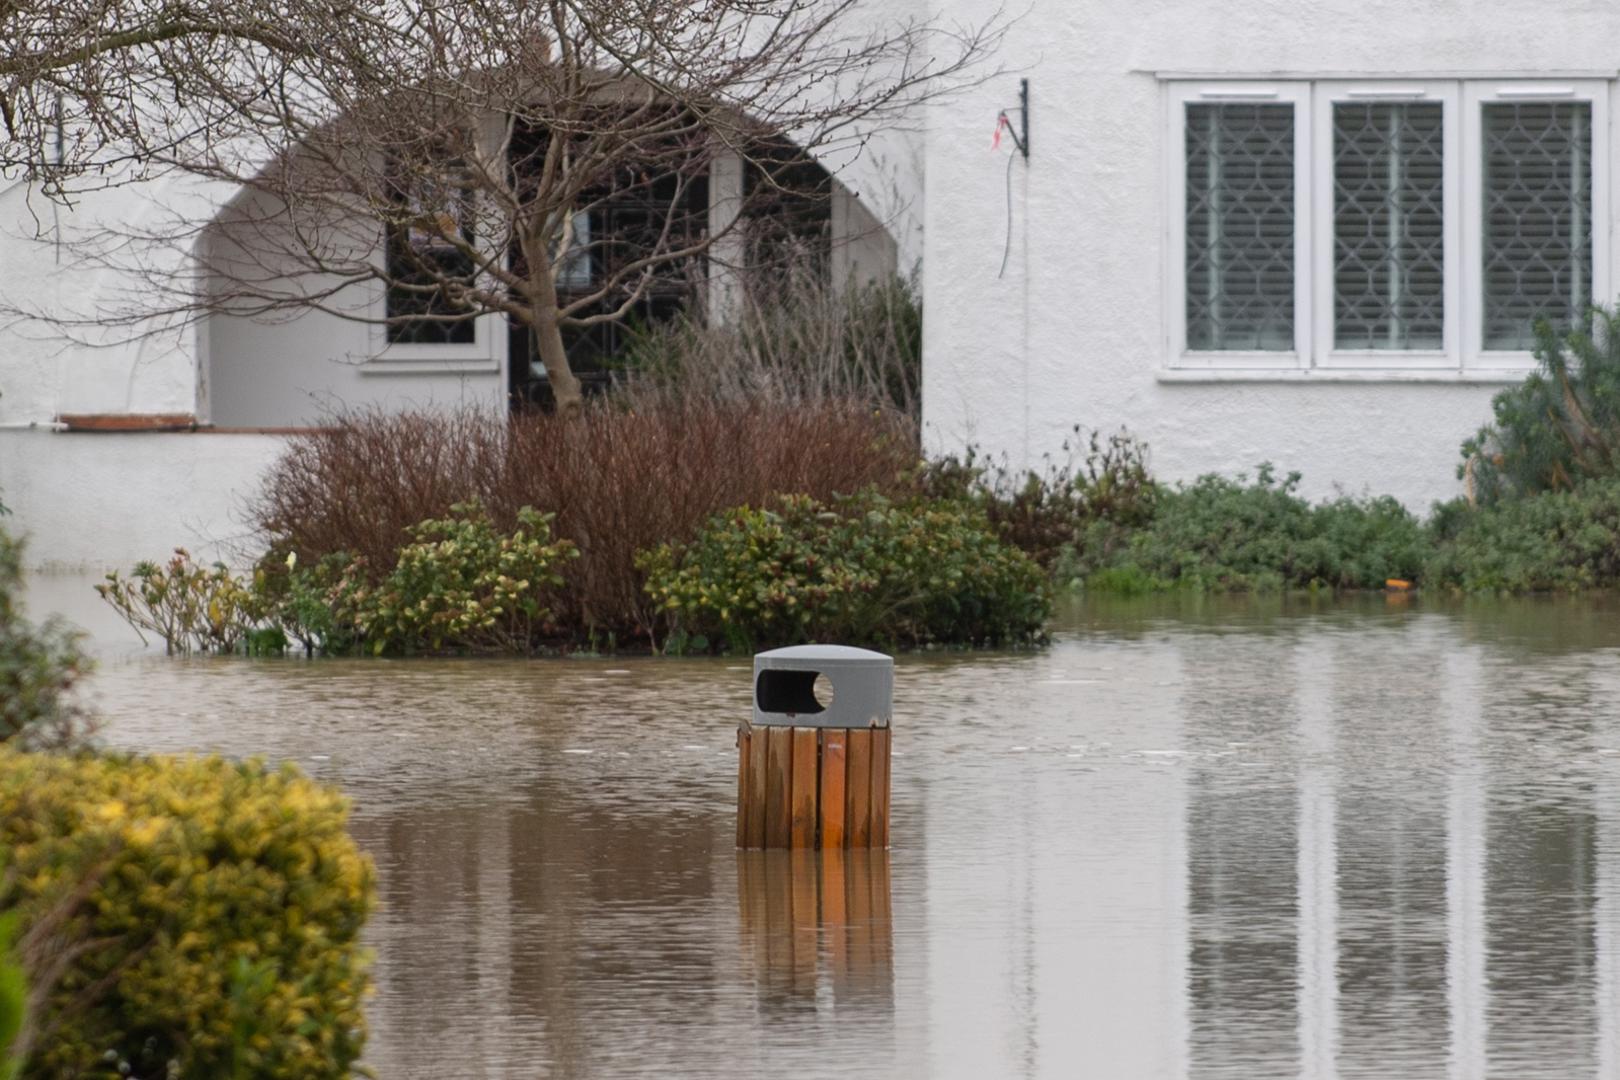 Winter weather Dec 26th 2020 Flood water surrounds The Barn Hotel in Bedford, after residents living near the River Great Ouse in north Bedfordshire were "strongly urged" to seek alternative accommodation due to fears of flooding. Joe Giddens  Photo: PA Images/PIXSELL